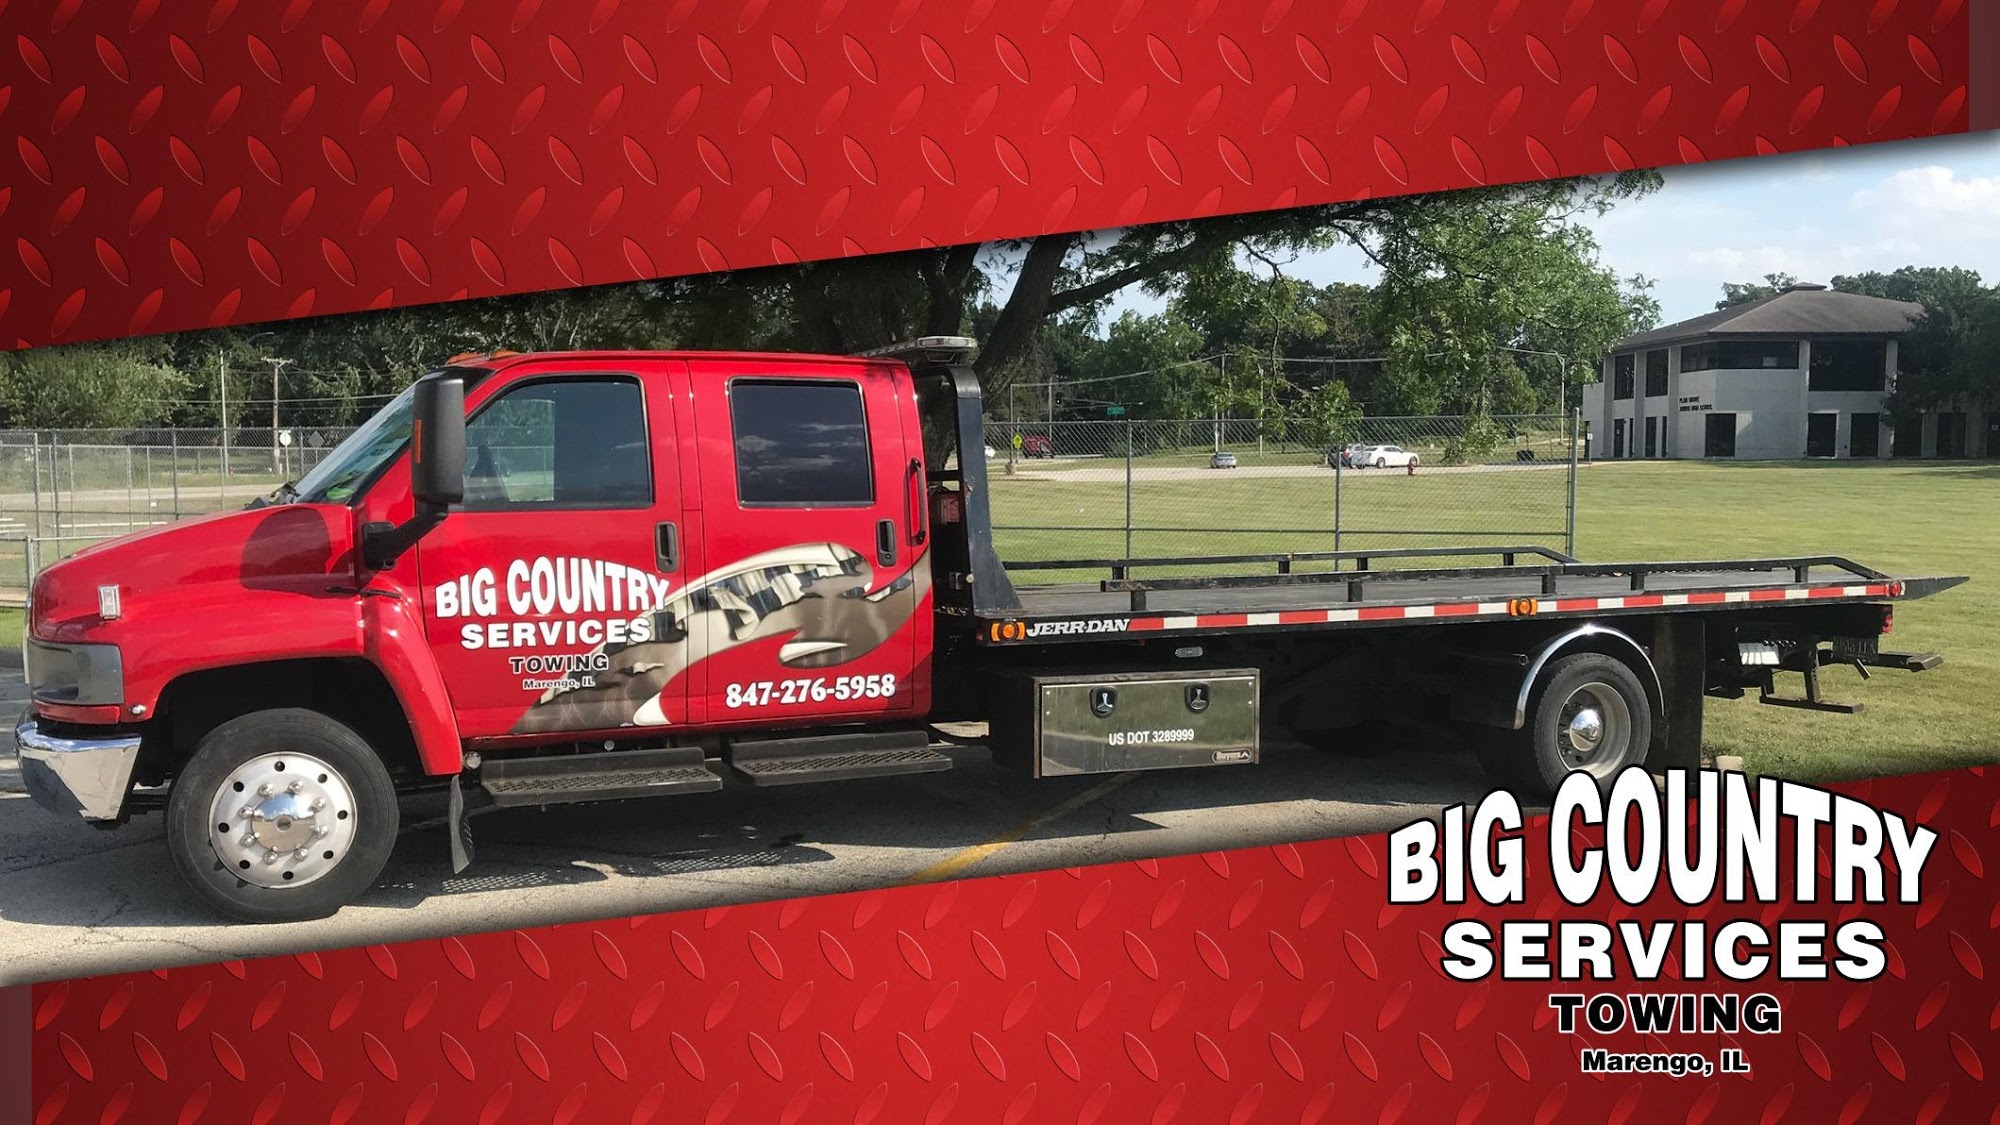 Big Country Services